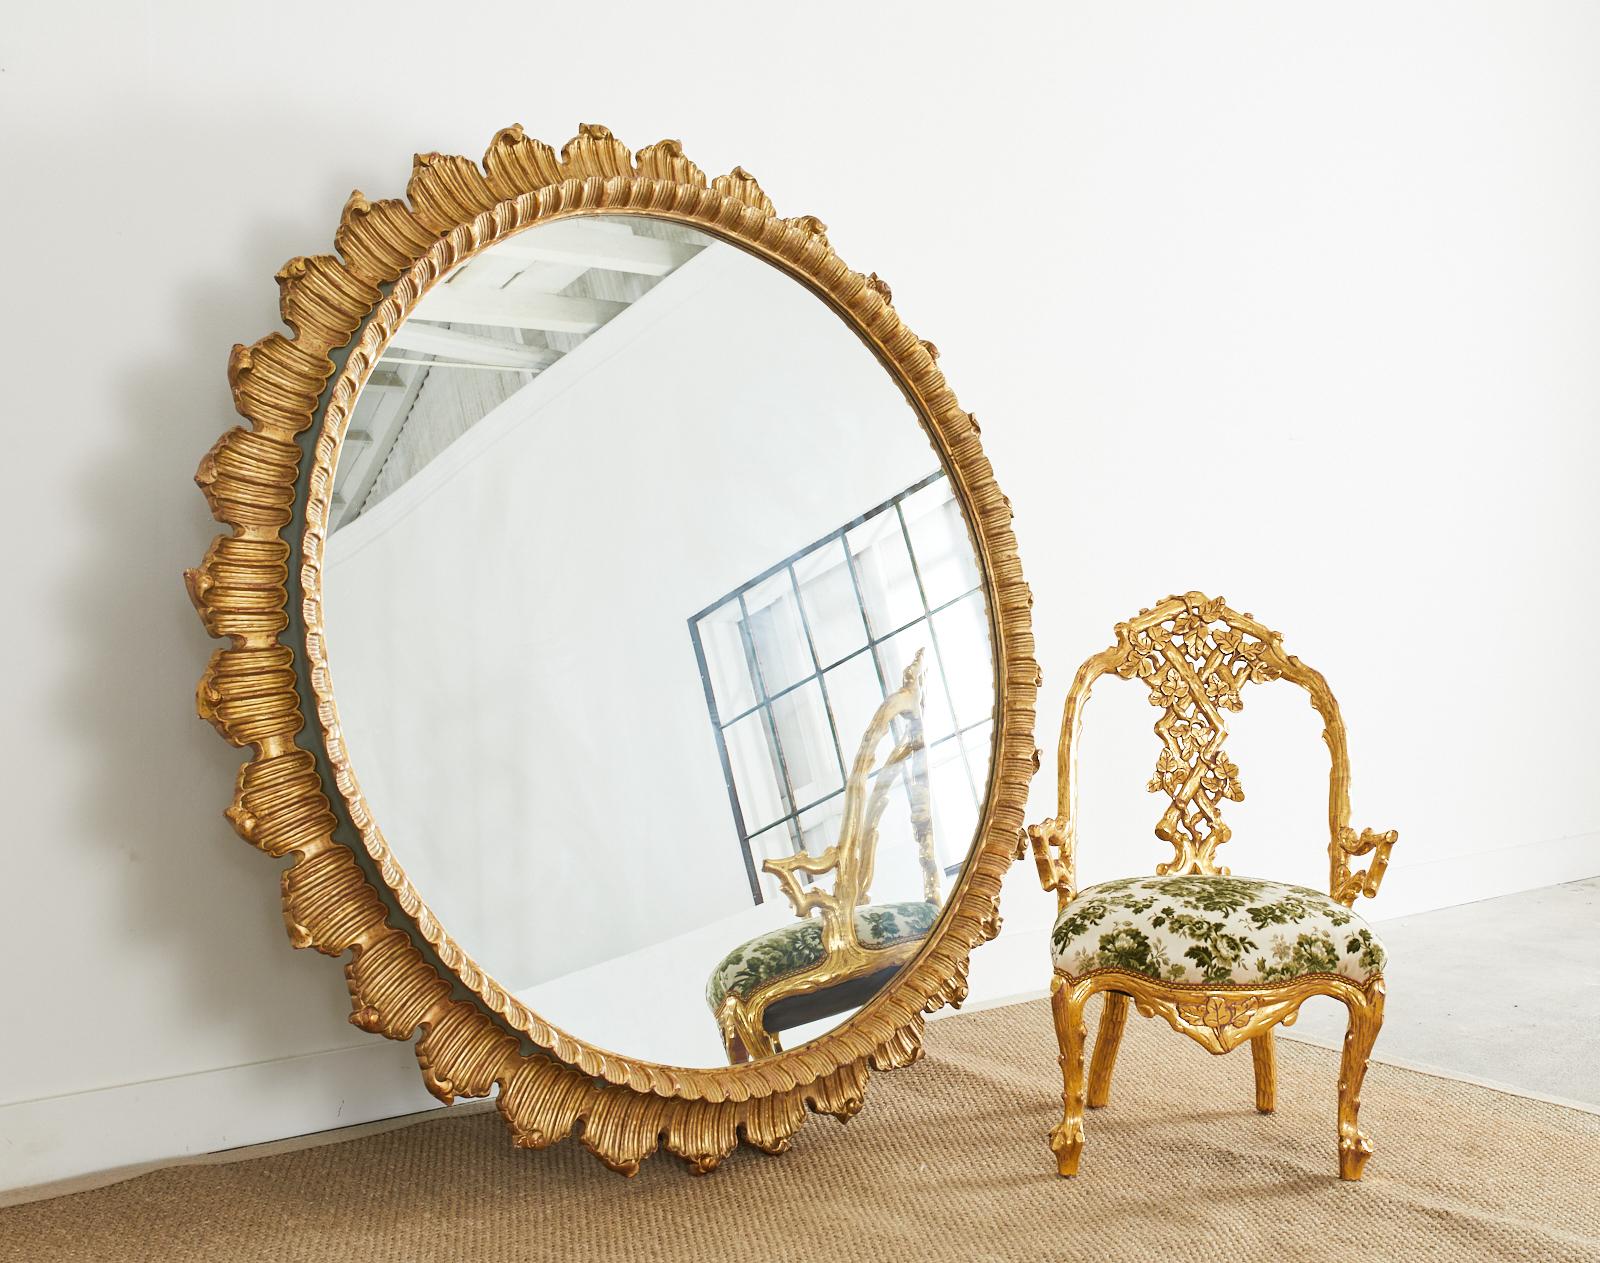 Fantastic Italian giltwood sunburst wall mirror made with monumental porportions and scale. Measuring nearly 68 inches wide with a carved frame having a neoclassical style rocaille shell motif outer border and a raised thinner gilt inner border. The